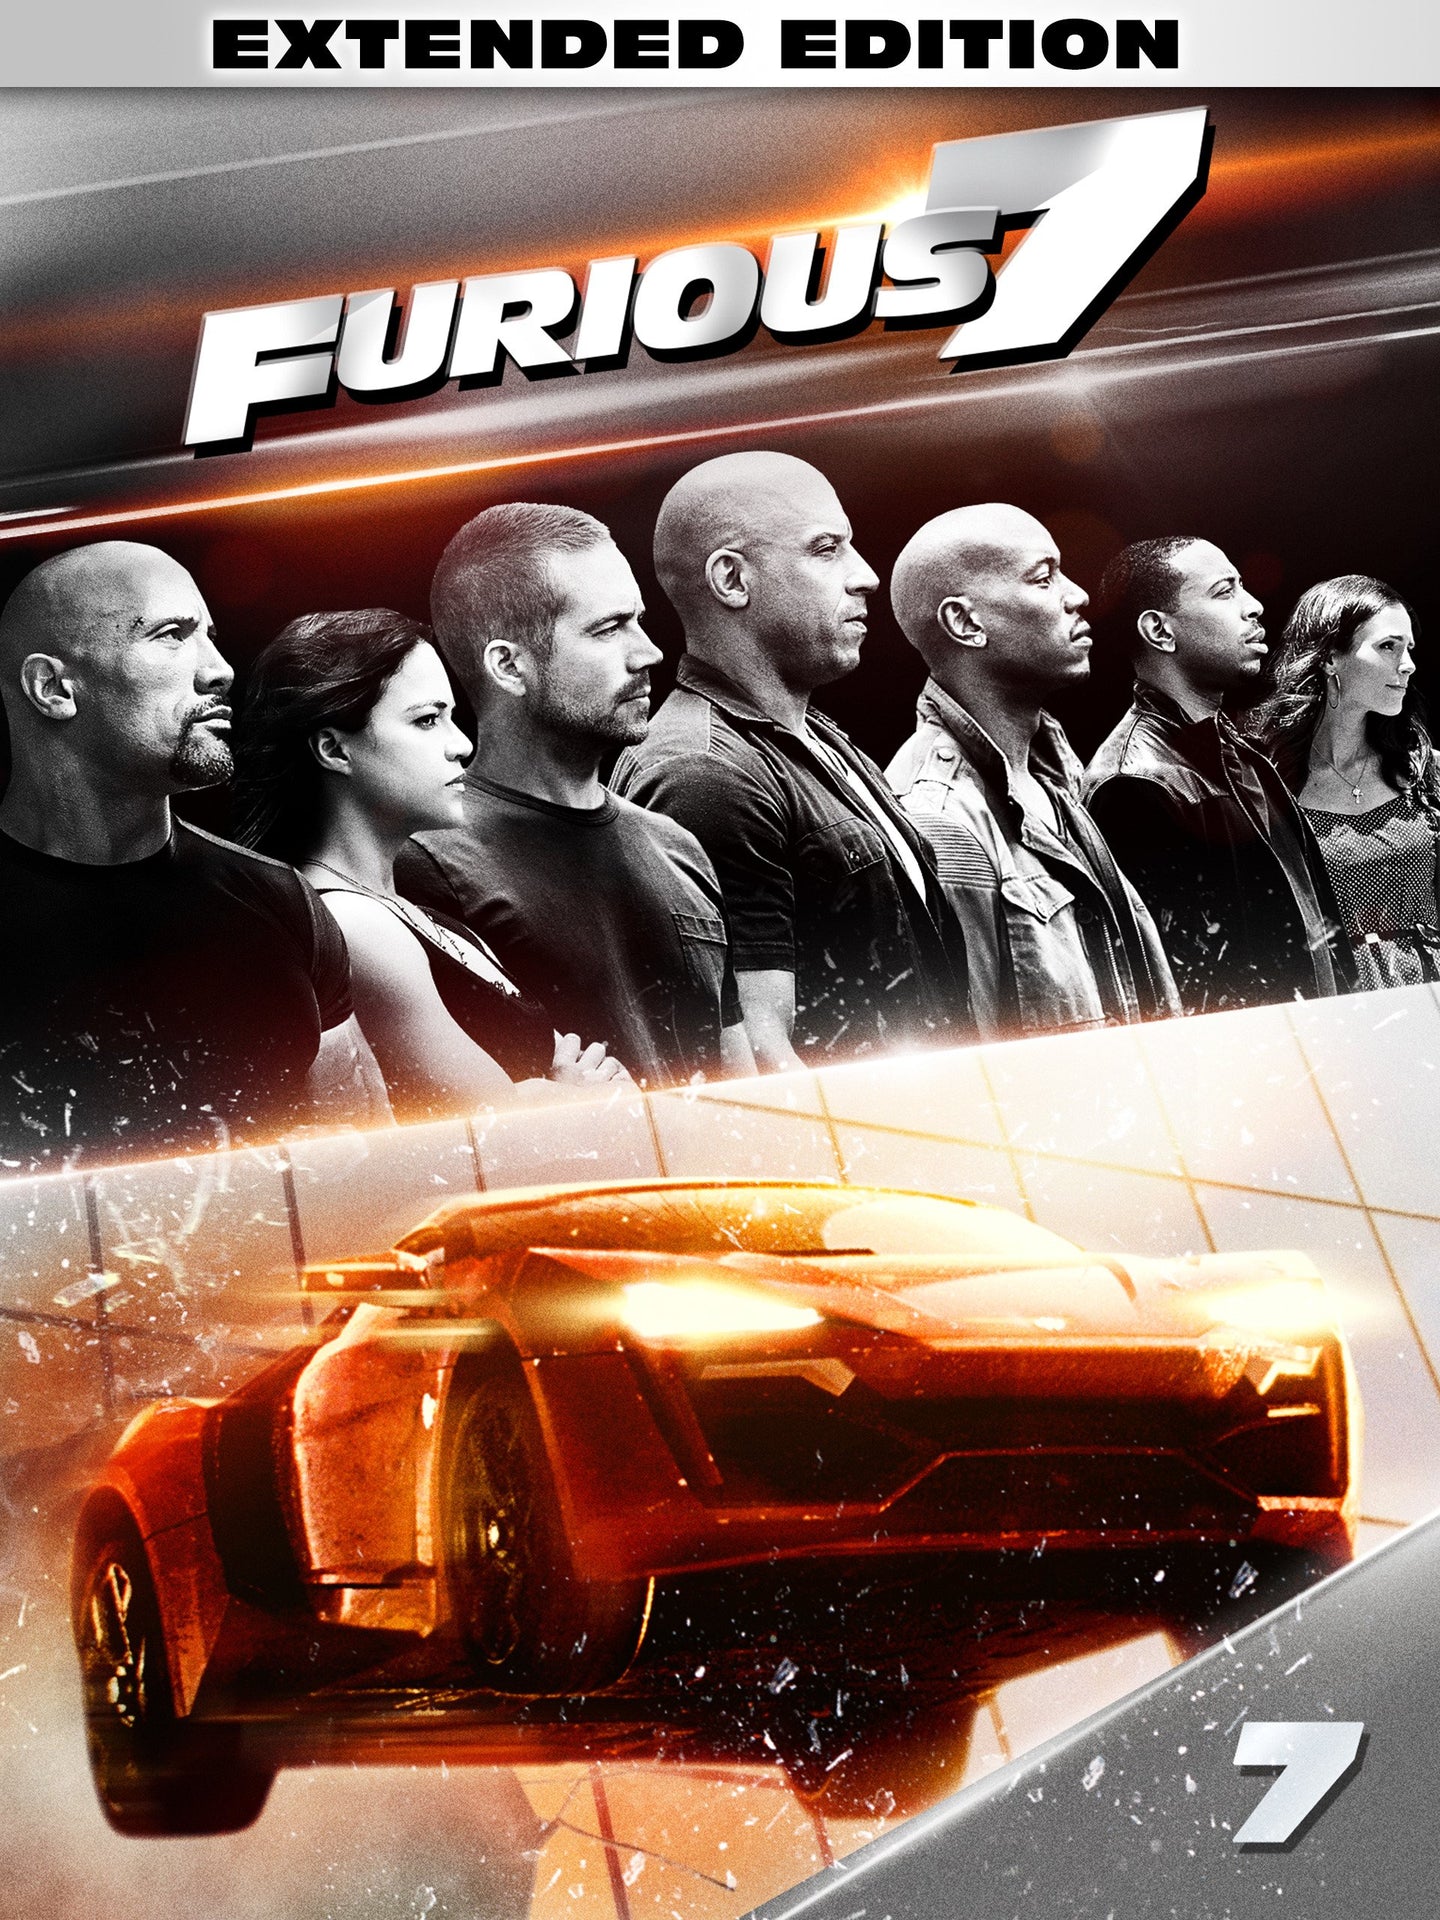 Furious 7 [Extended Edition] (2015) Vudu or Movies Anywhere HD redemption only